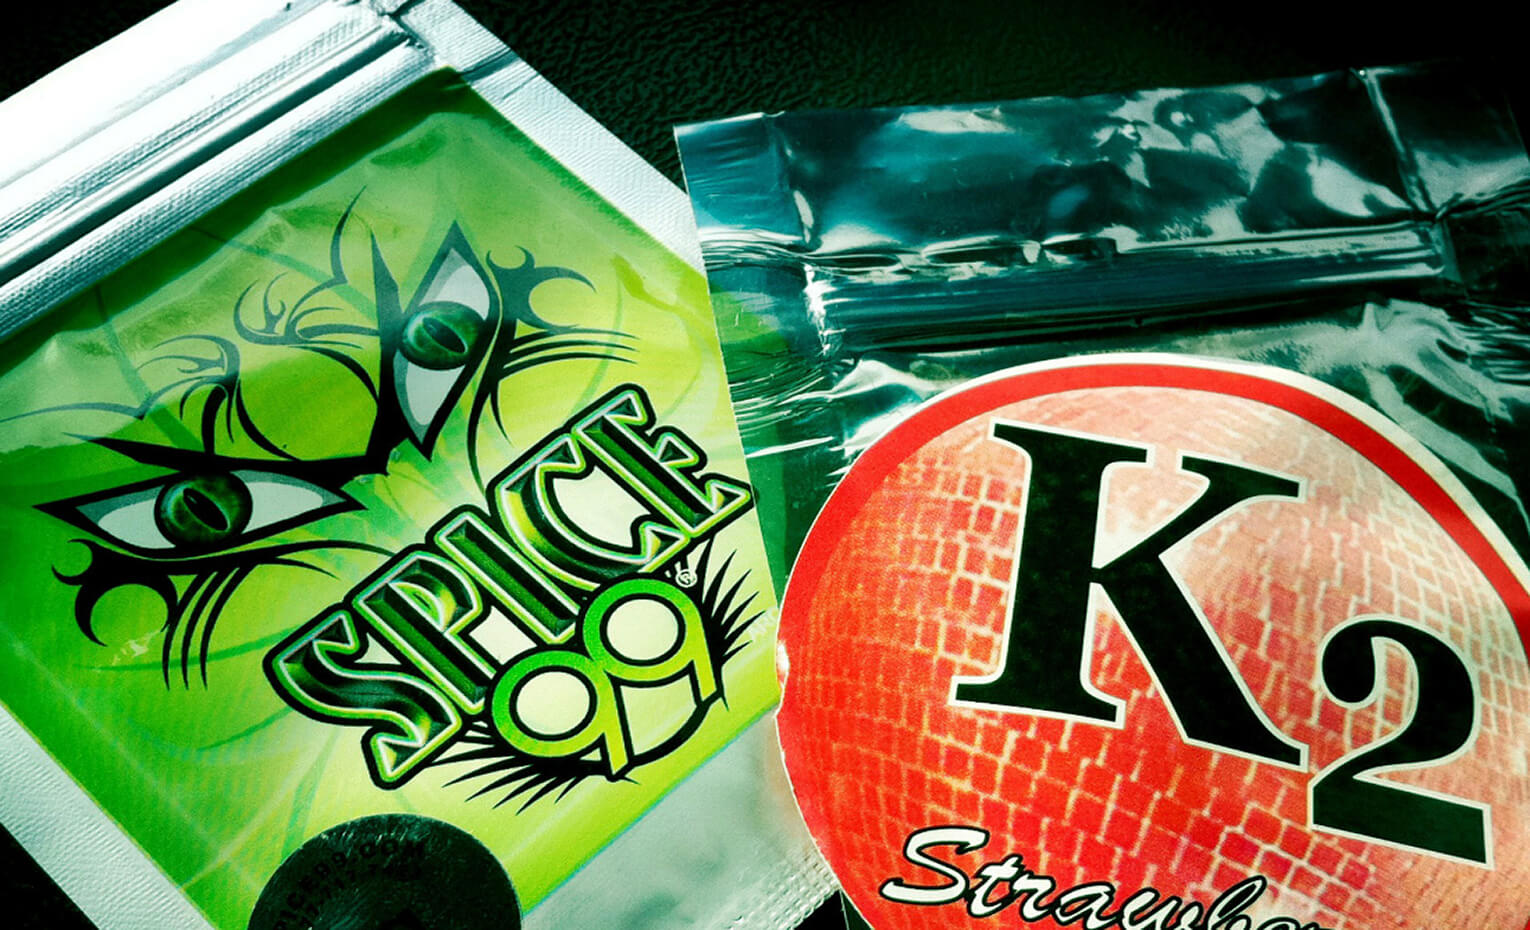 Examples of Spice and K2 packaging